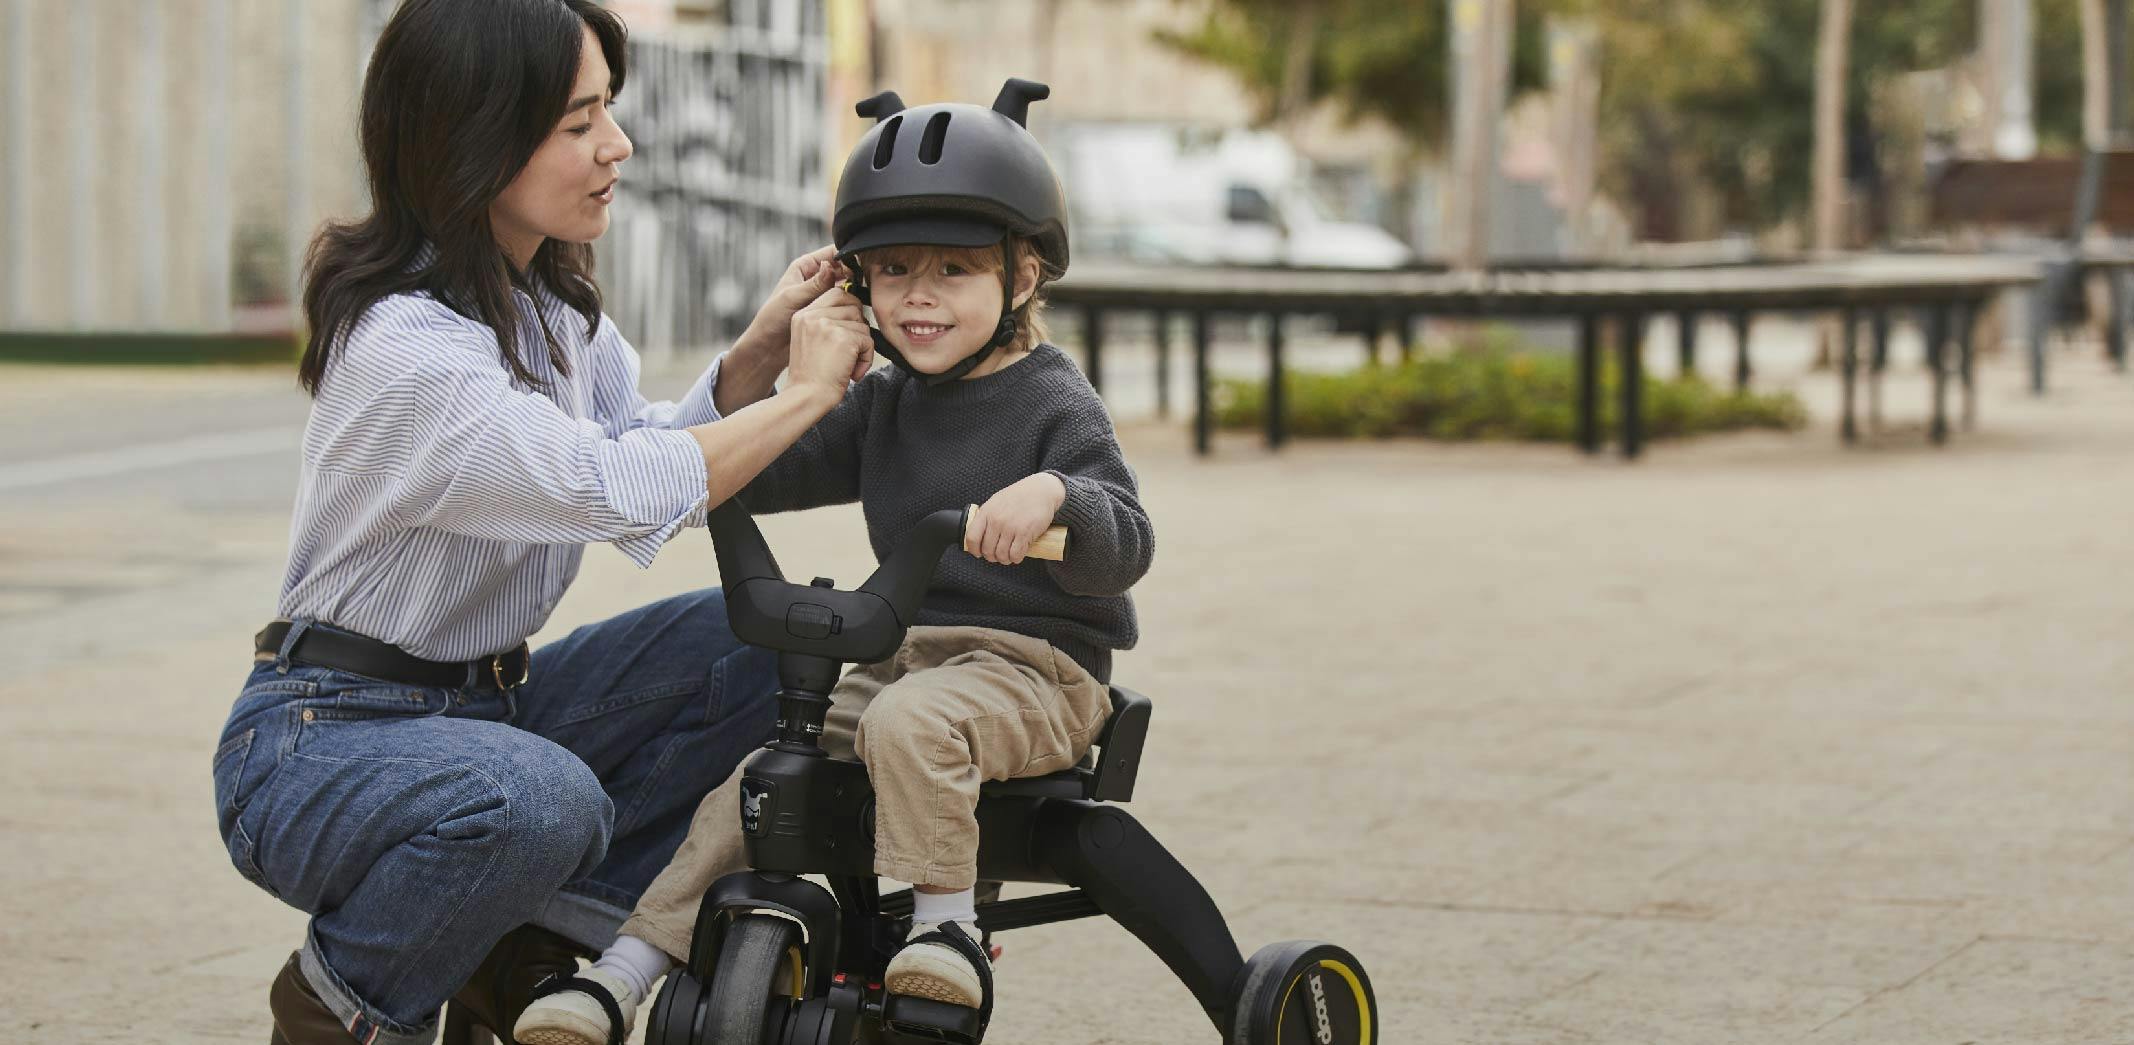 Get ready to roll! How the Liki Helmet transforms safety into fun